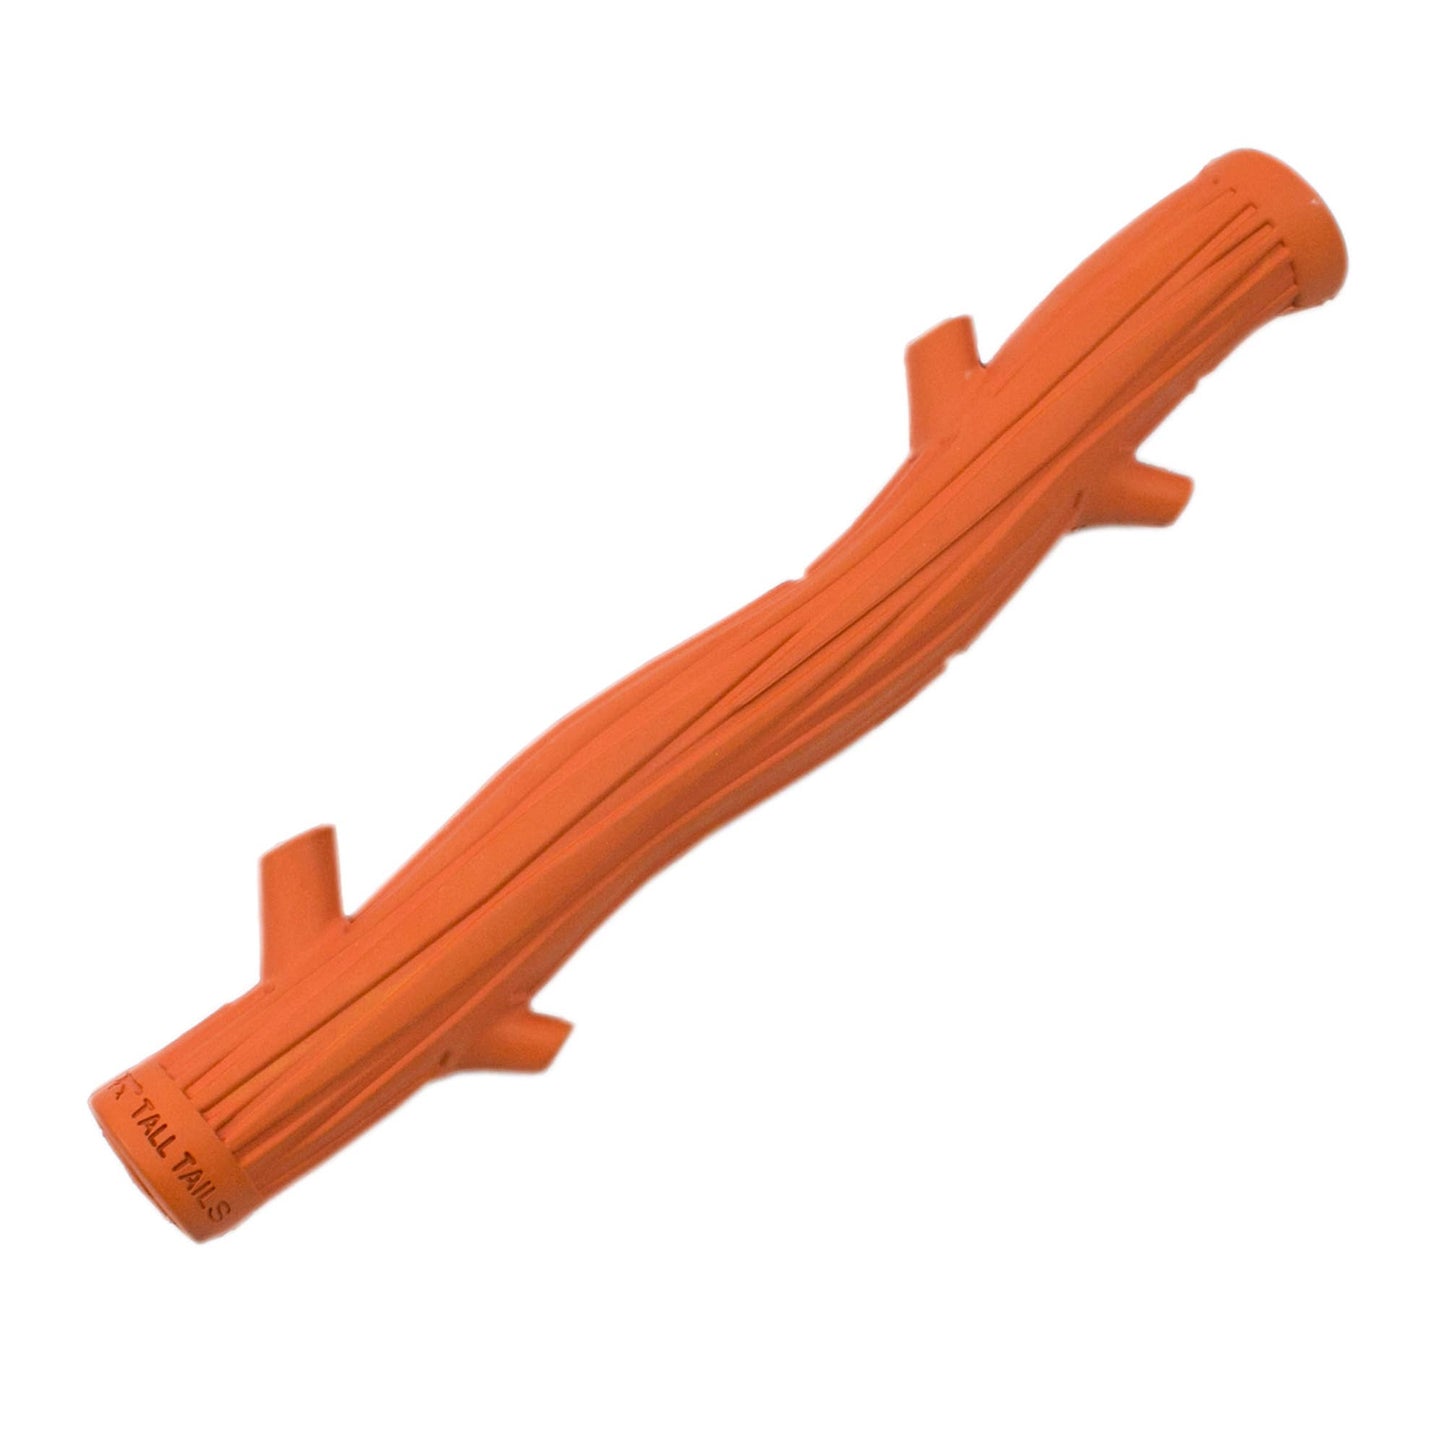 Tall Tails Natural Rubber Stick Toy